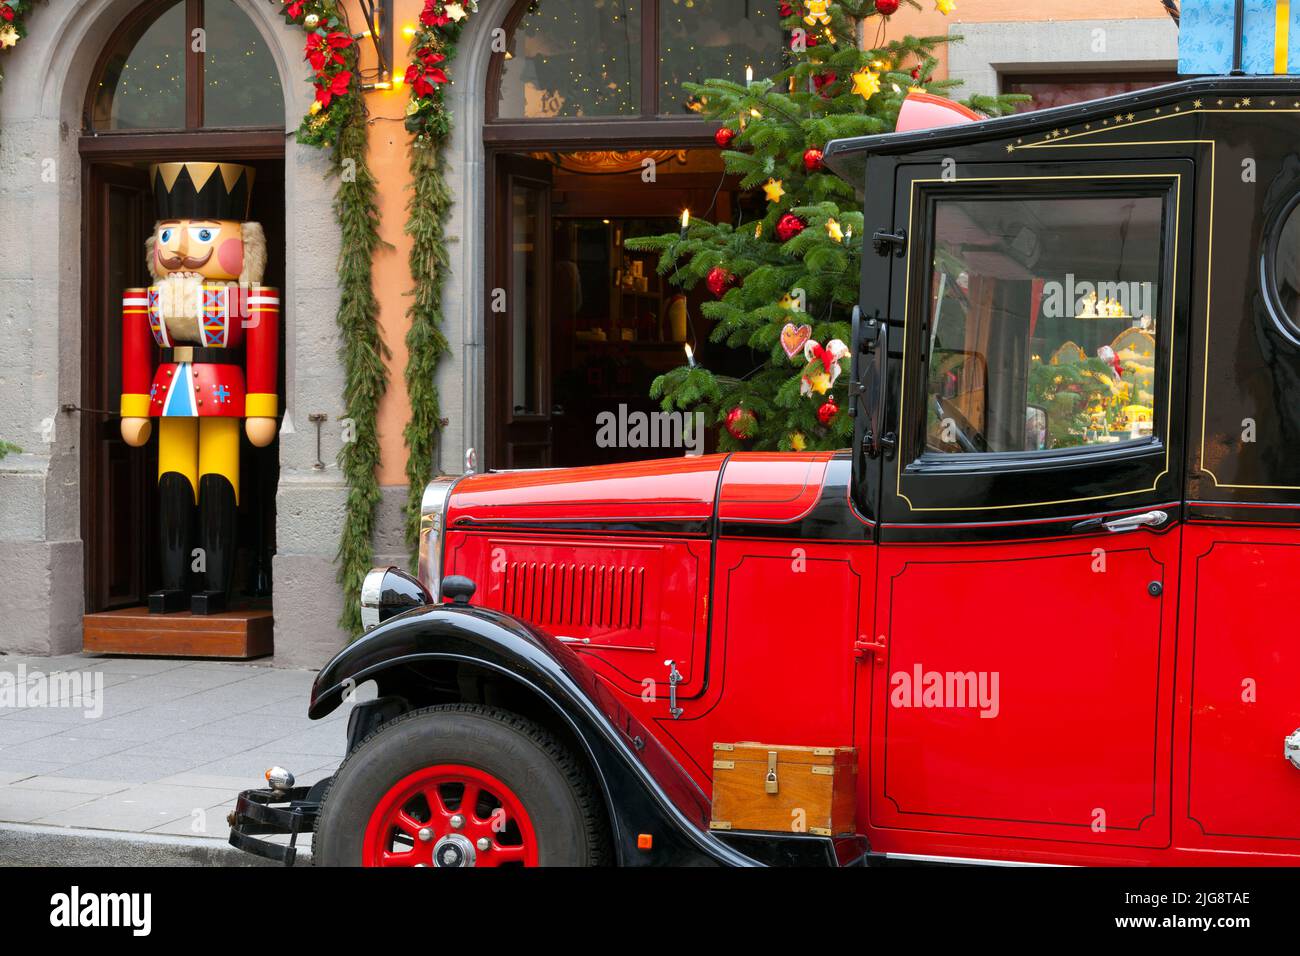 Antique Car outside a store decorated with Christmas decorations, Rothenburg ob der Tauber, Bavaria, Germany. Stock Photo